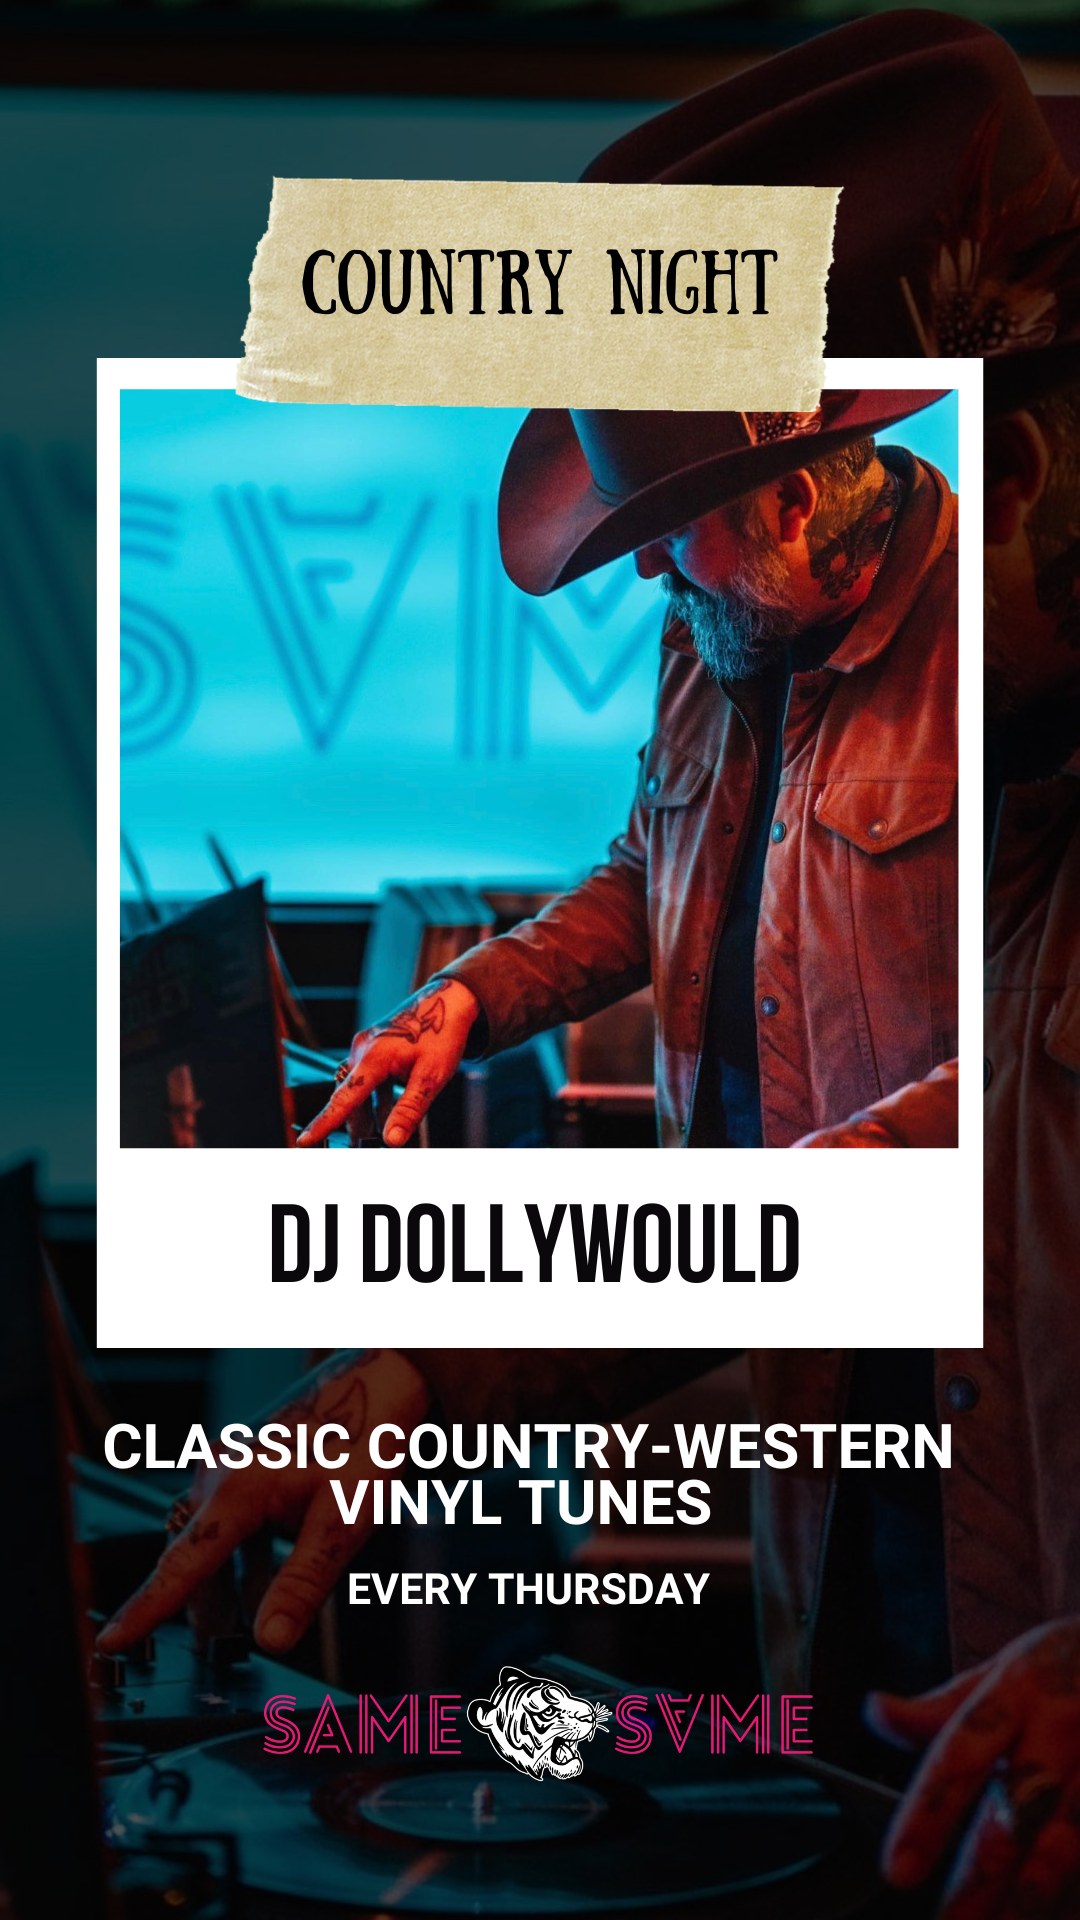 Carlsbad Country Music Night with DJ DollyWould at Same Same inside Village Faire